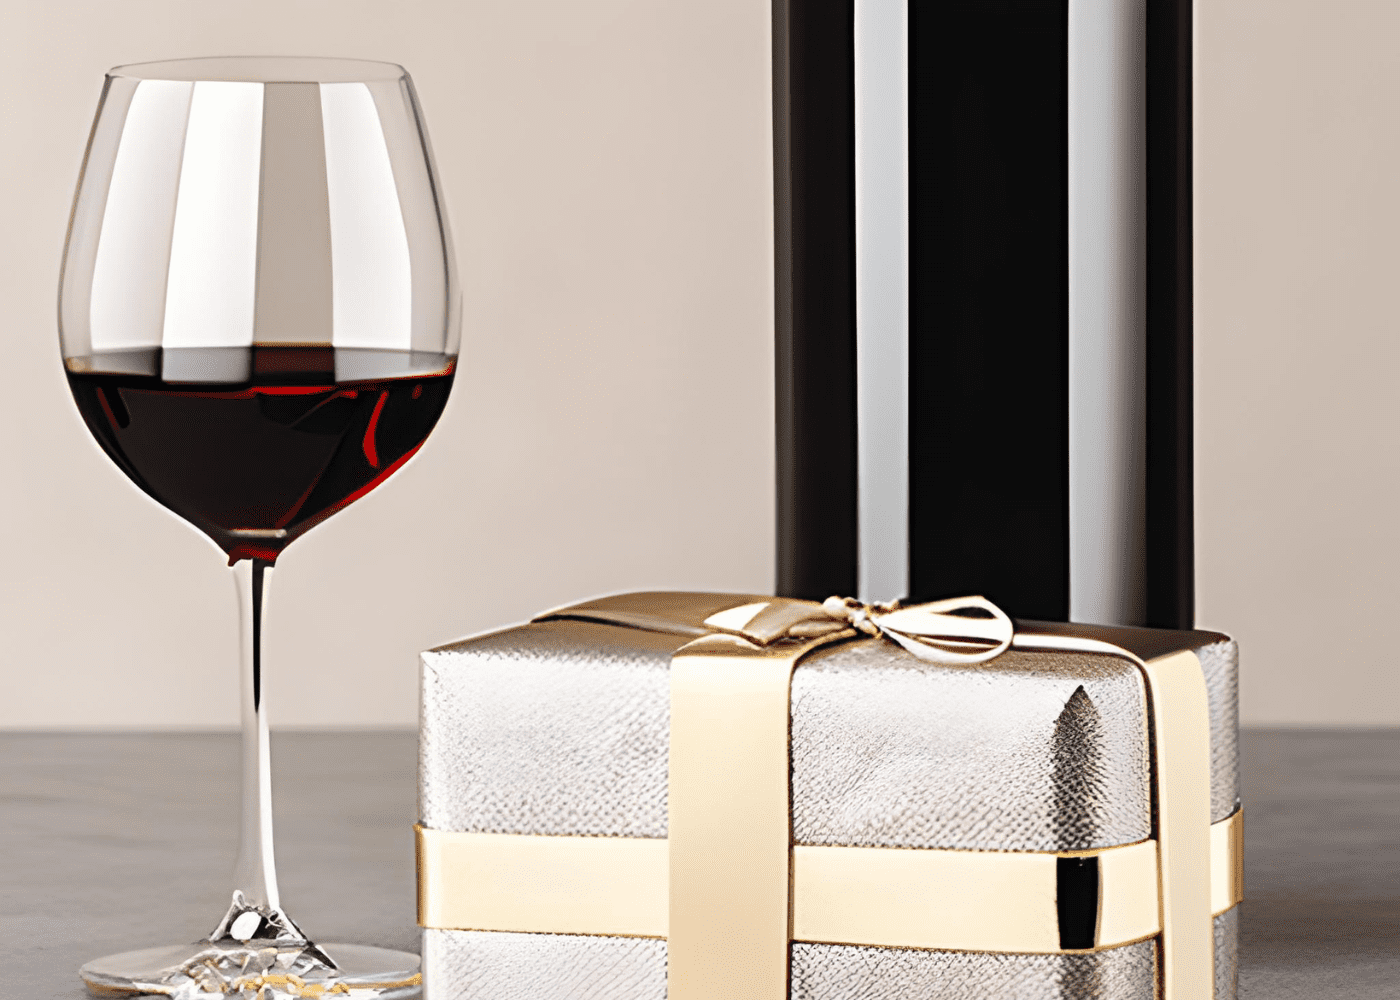 Red wine glass next to a gift box